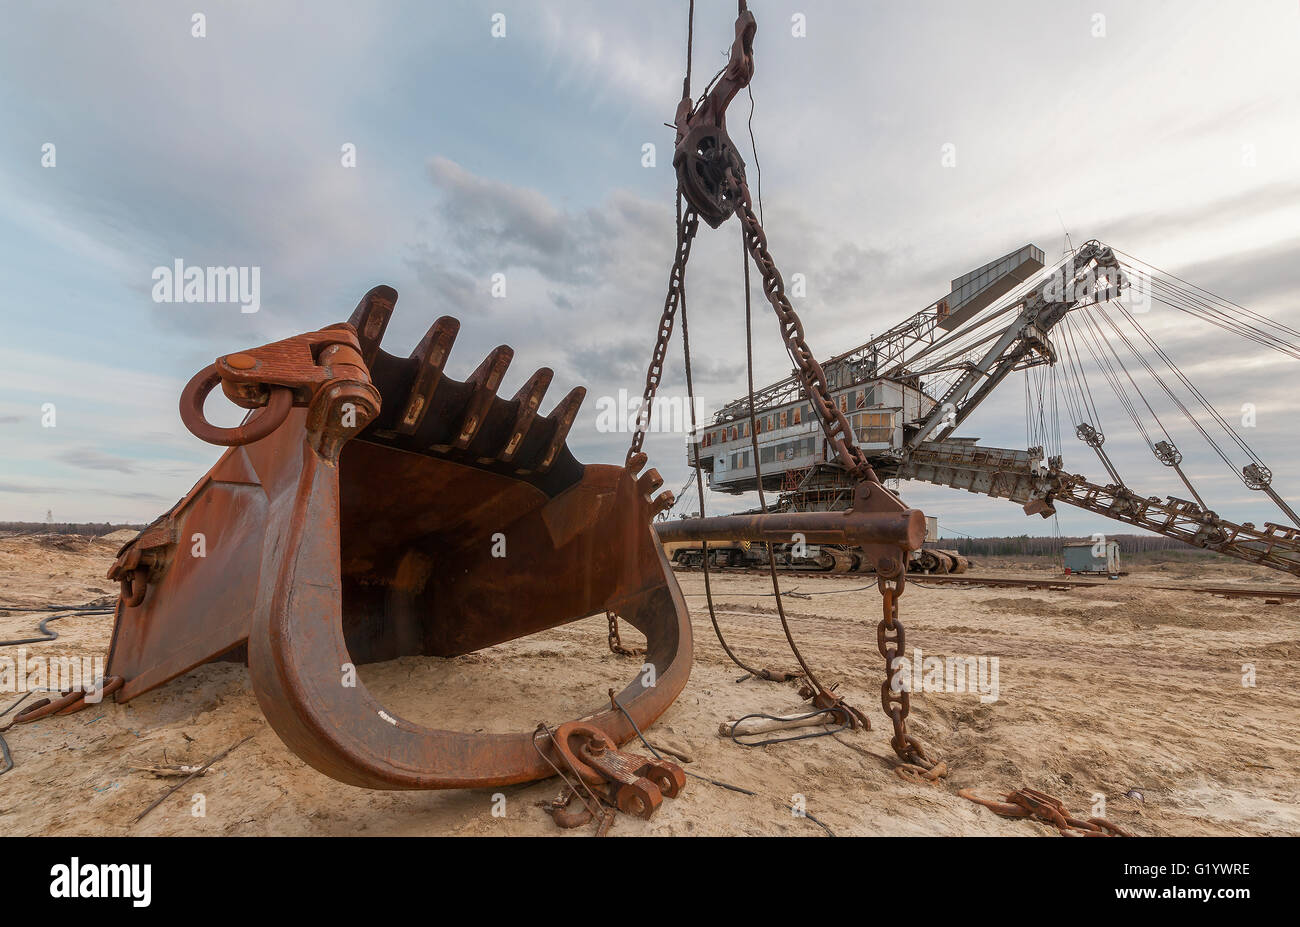 A giant rusty bucket in the background quarry excavator Equipment for the extraction of sand from the quarry. Stock Photo